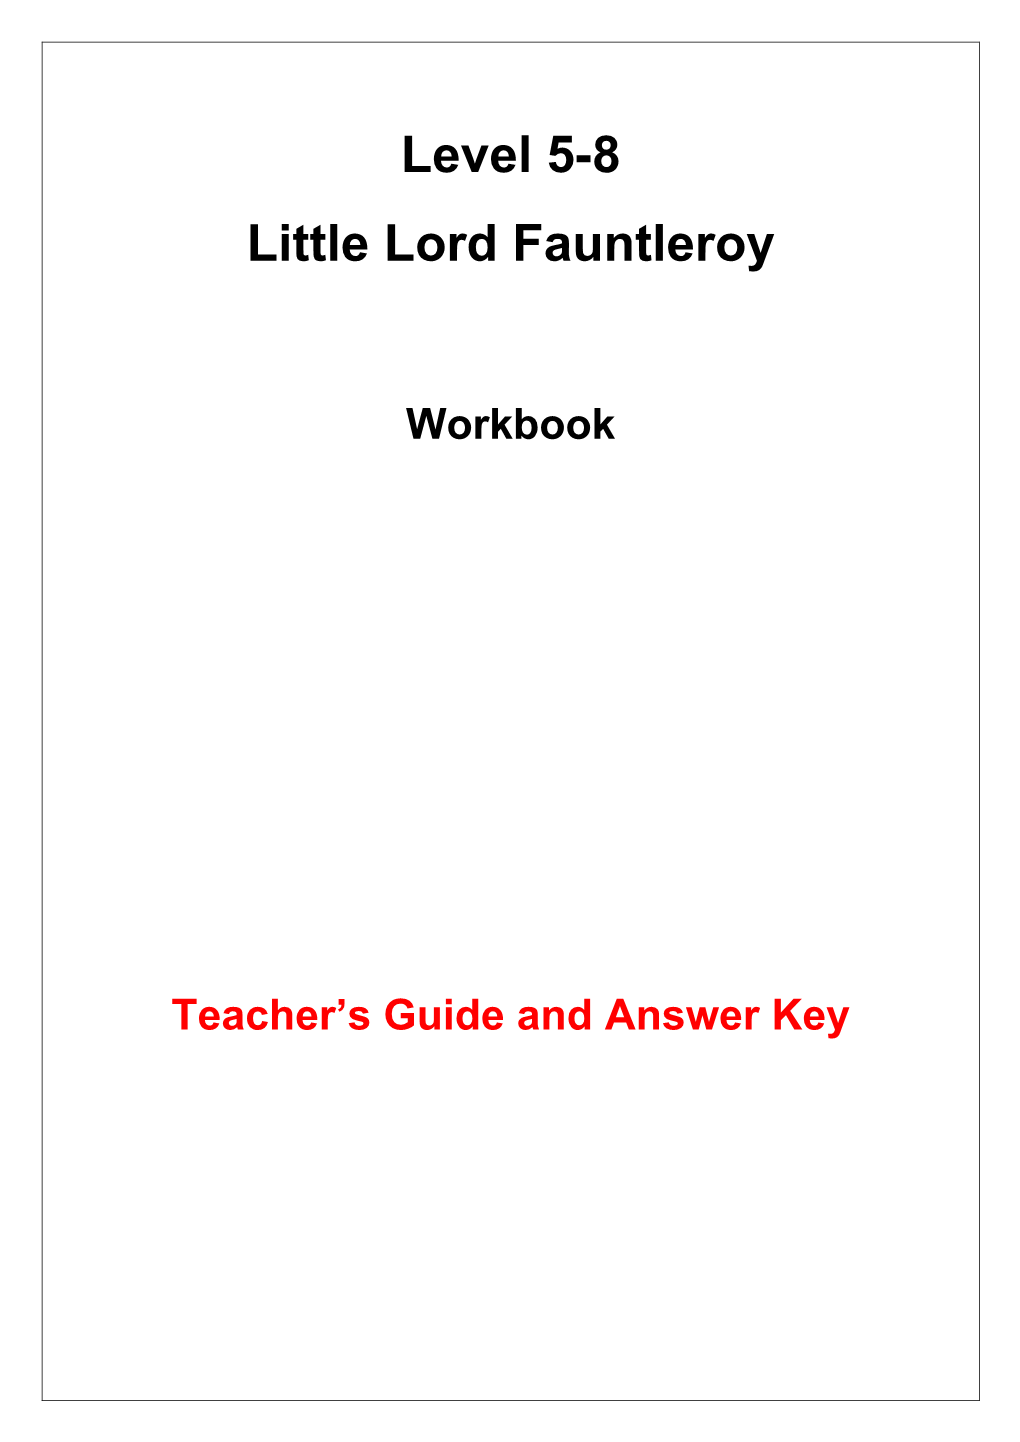 Level 5-8 Little Lord Fauntleroy